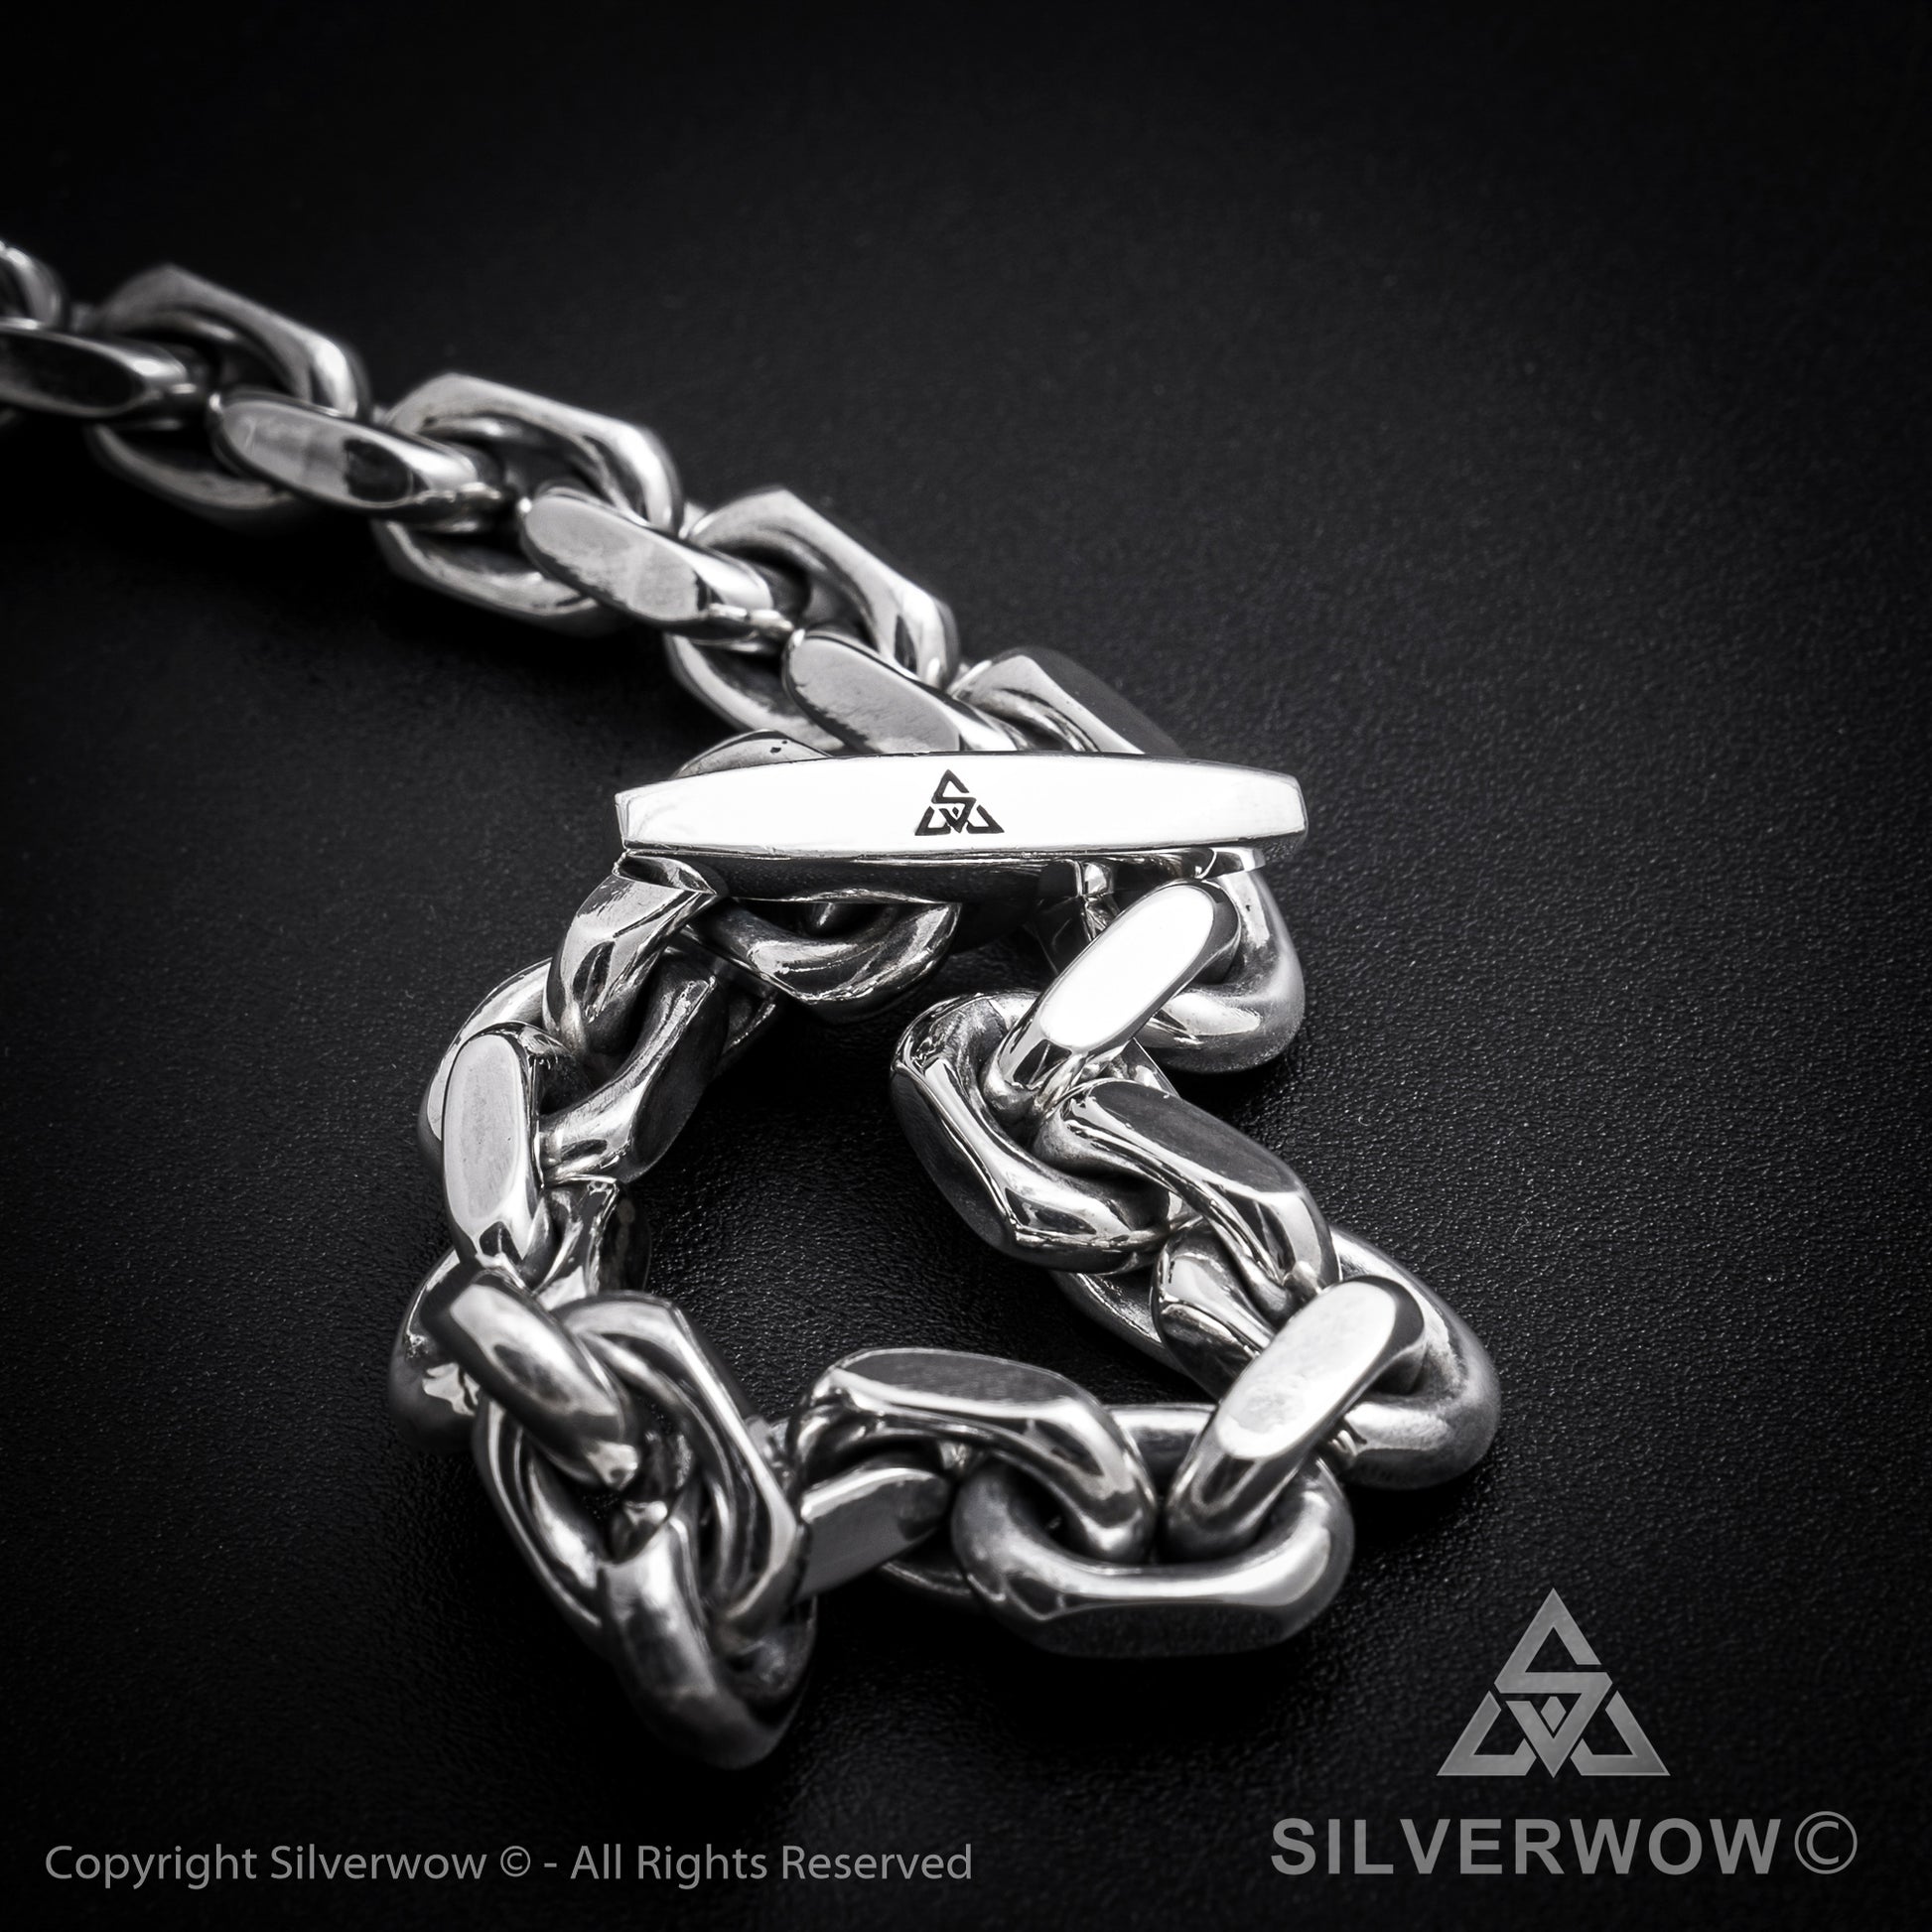 New Fashion 26 Initial Bracelet Women Toggle Clasp Stainless Steel Figaro  Chain Bracelet For Women